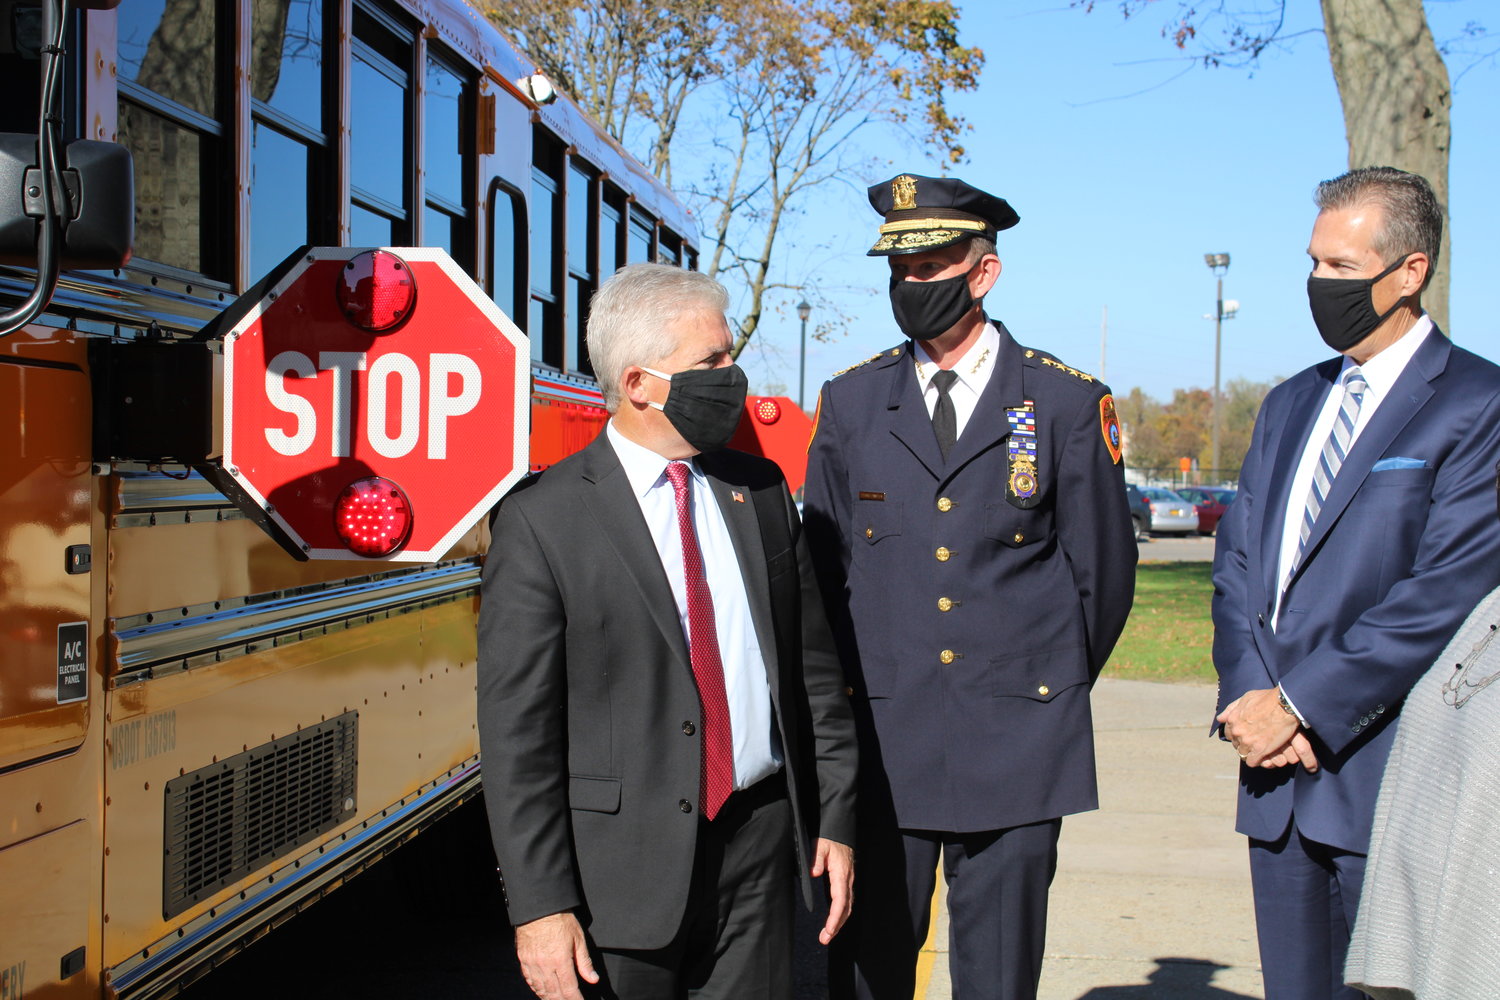 Suffolk County executive Steve Bellone announces a new partnership with BusPatrol America, Nov. 10, at Bay Shore’s district building, which will implement stop-arm cameras to roughly 6,000 school buses in the county.